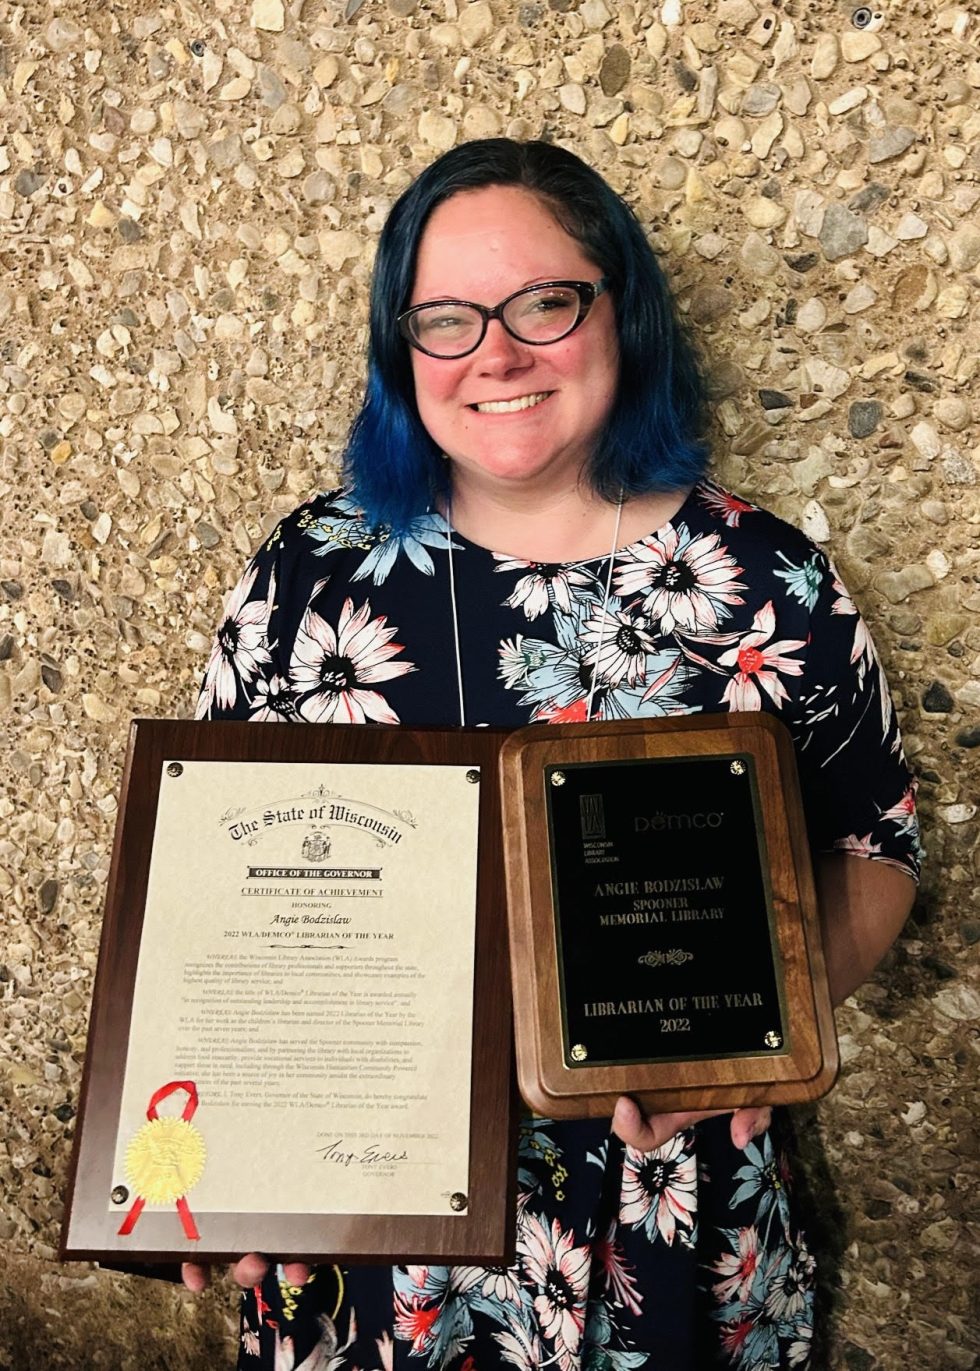 Library Director Wins Wisconsin Library Association Librarian of the